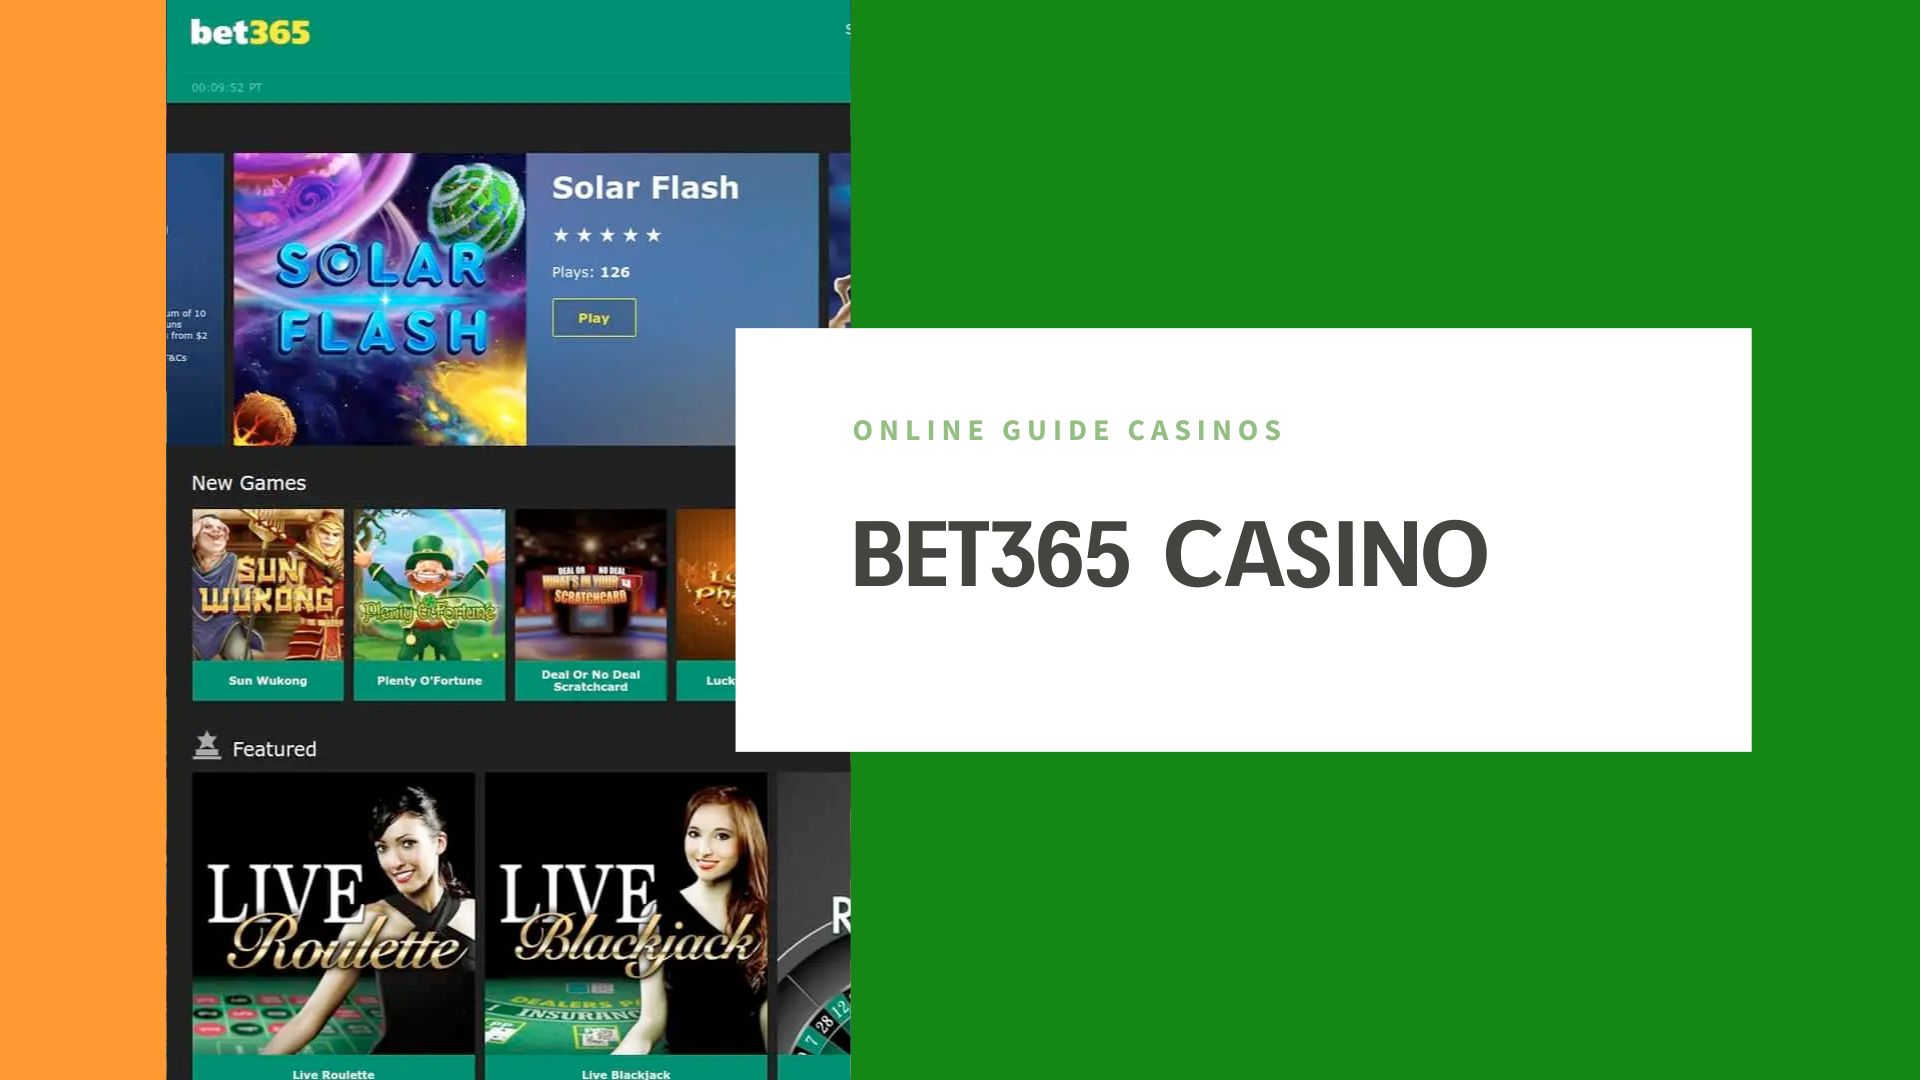 A Few Words About Bet365 Online Casino